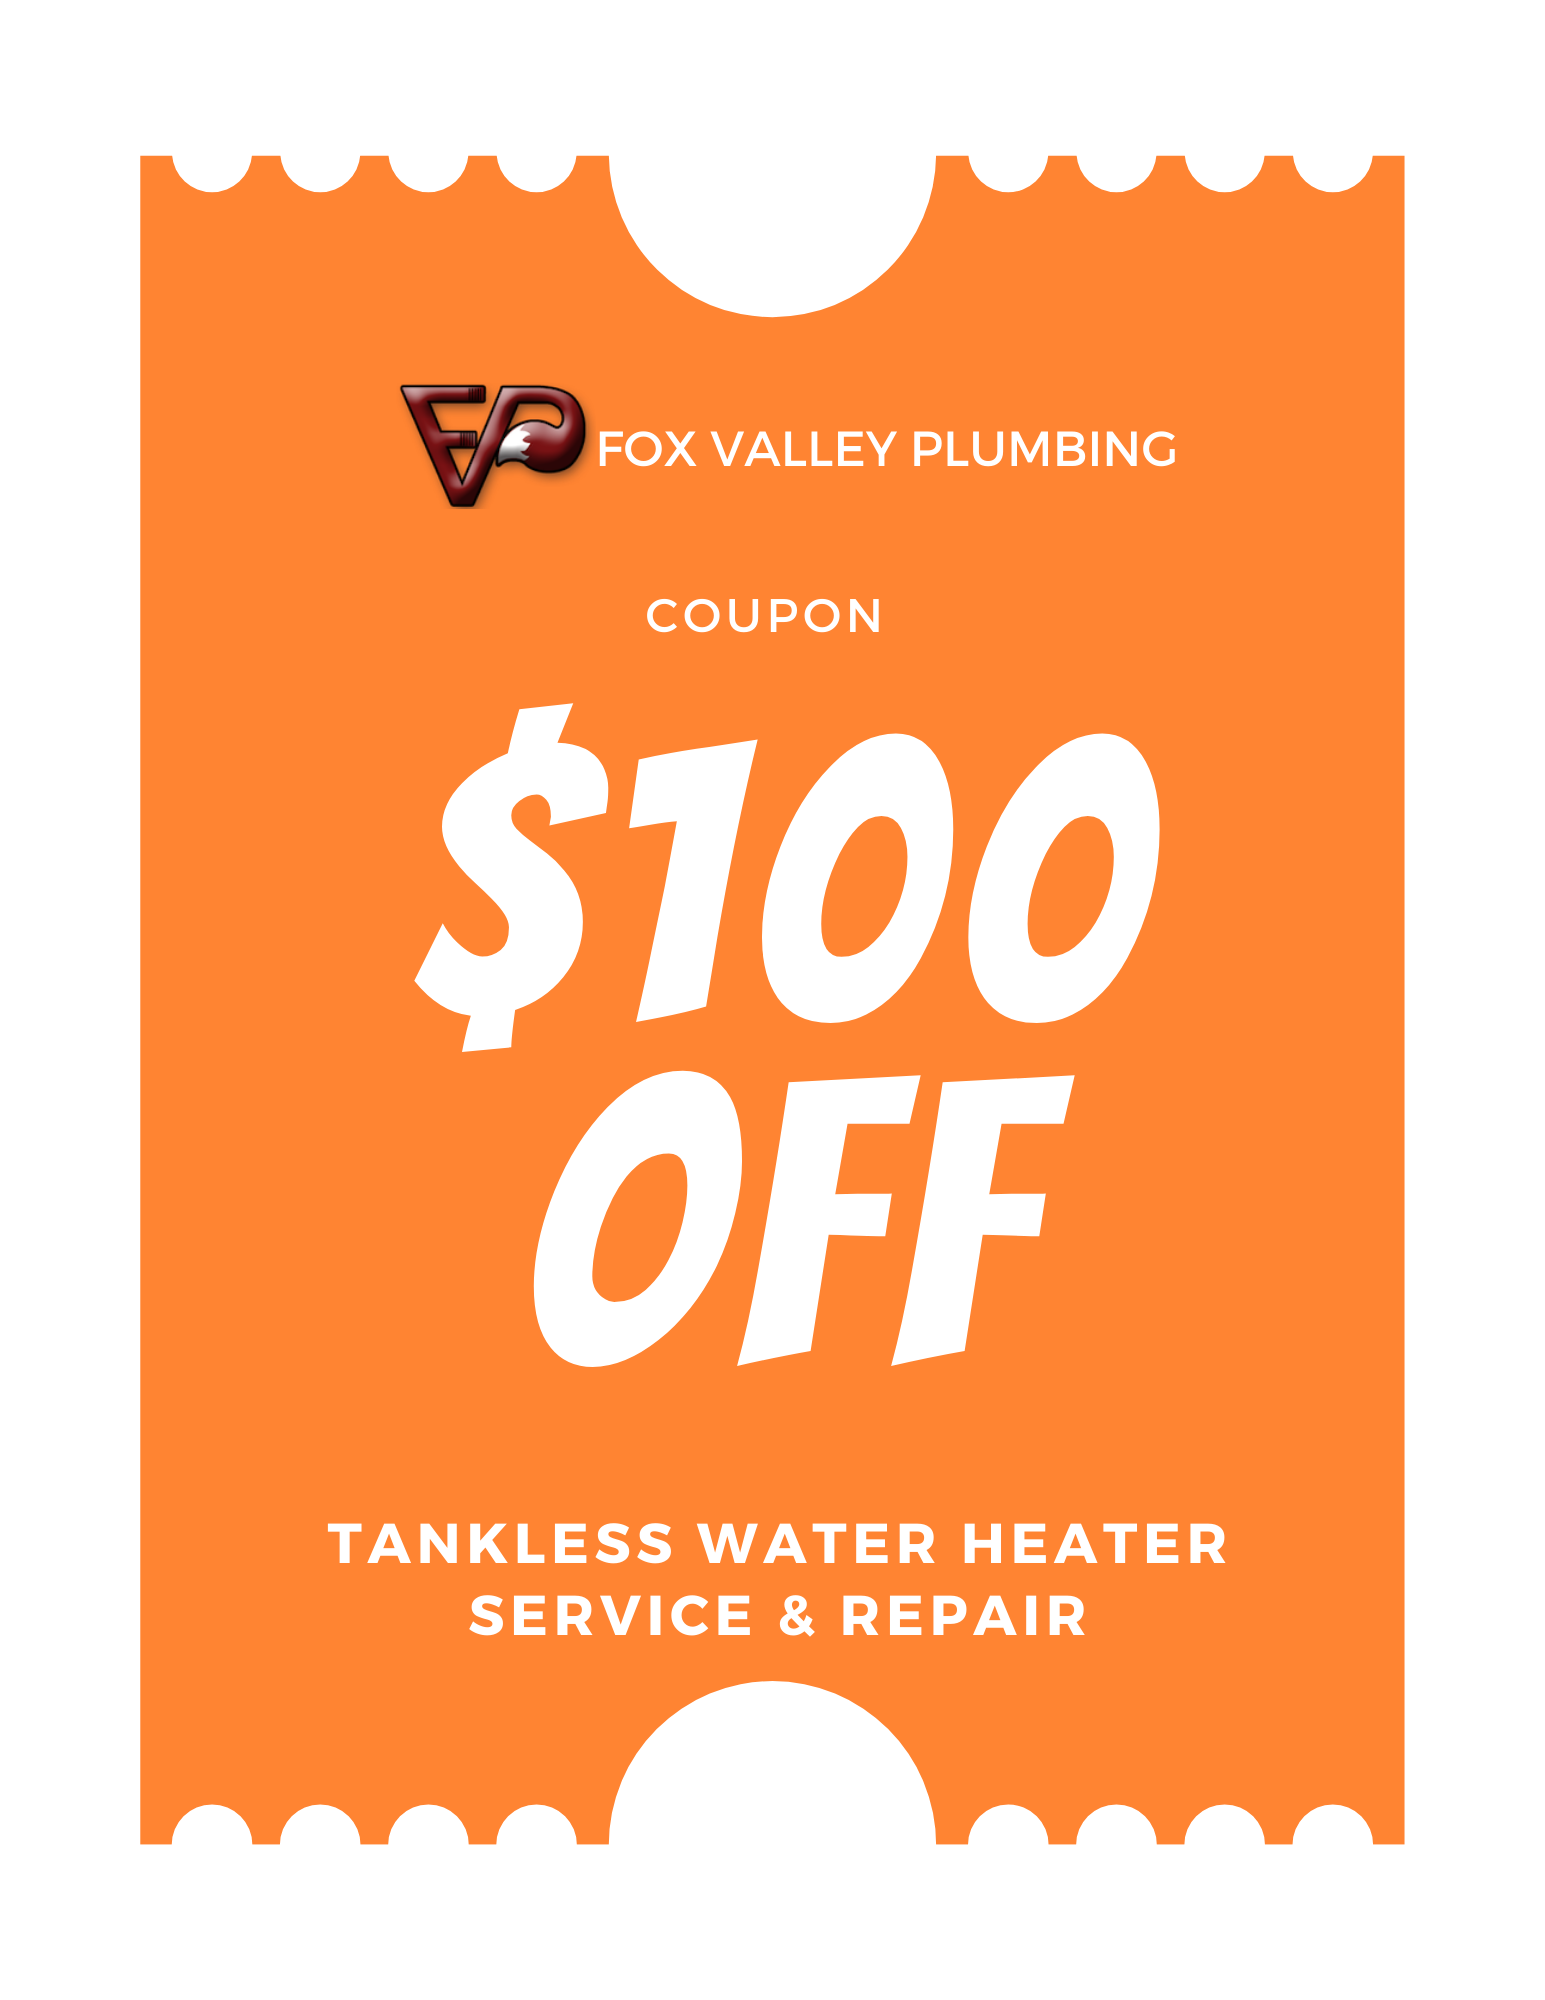 fox-valley-plumbing-tankless-water-heater-25-off-elgin-il.-august